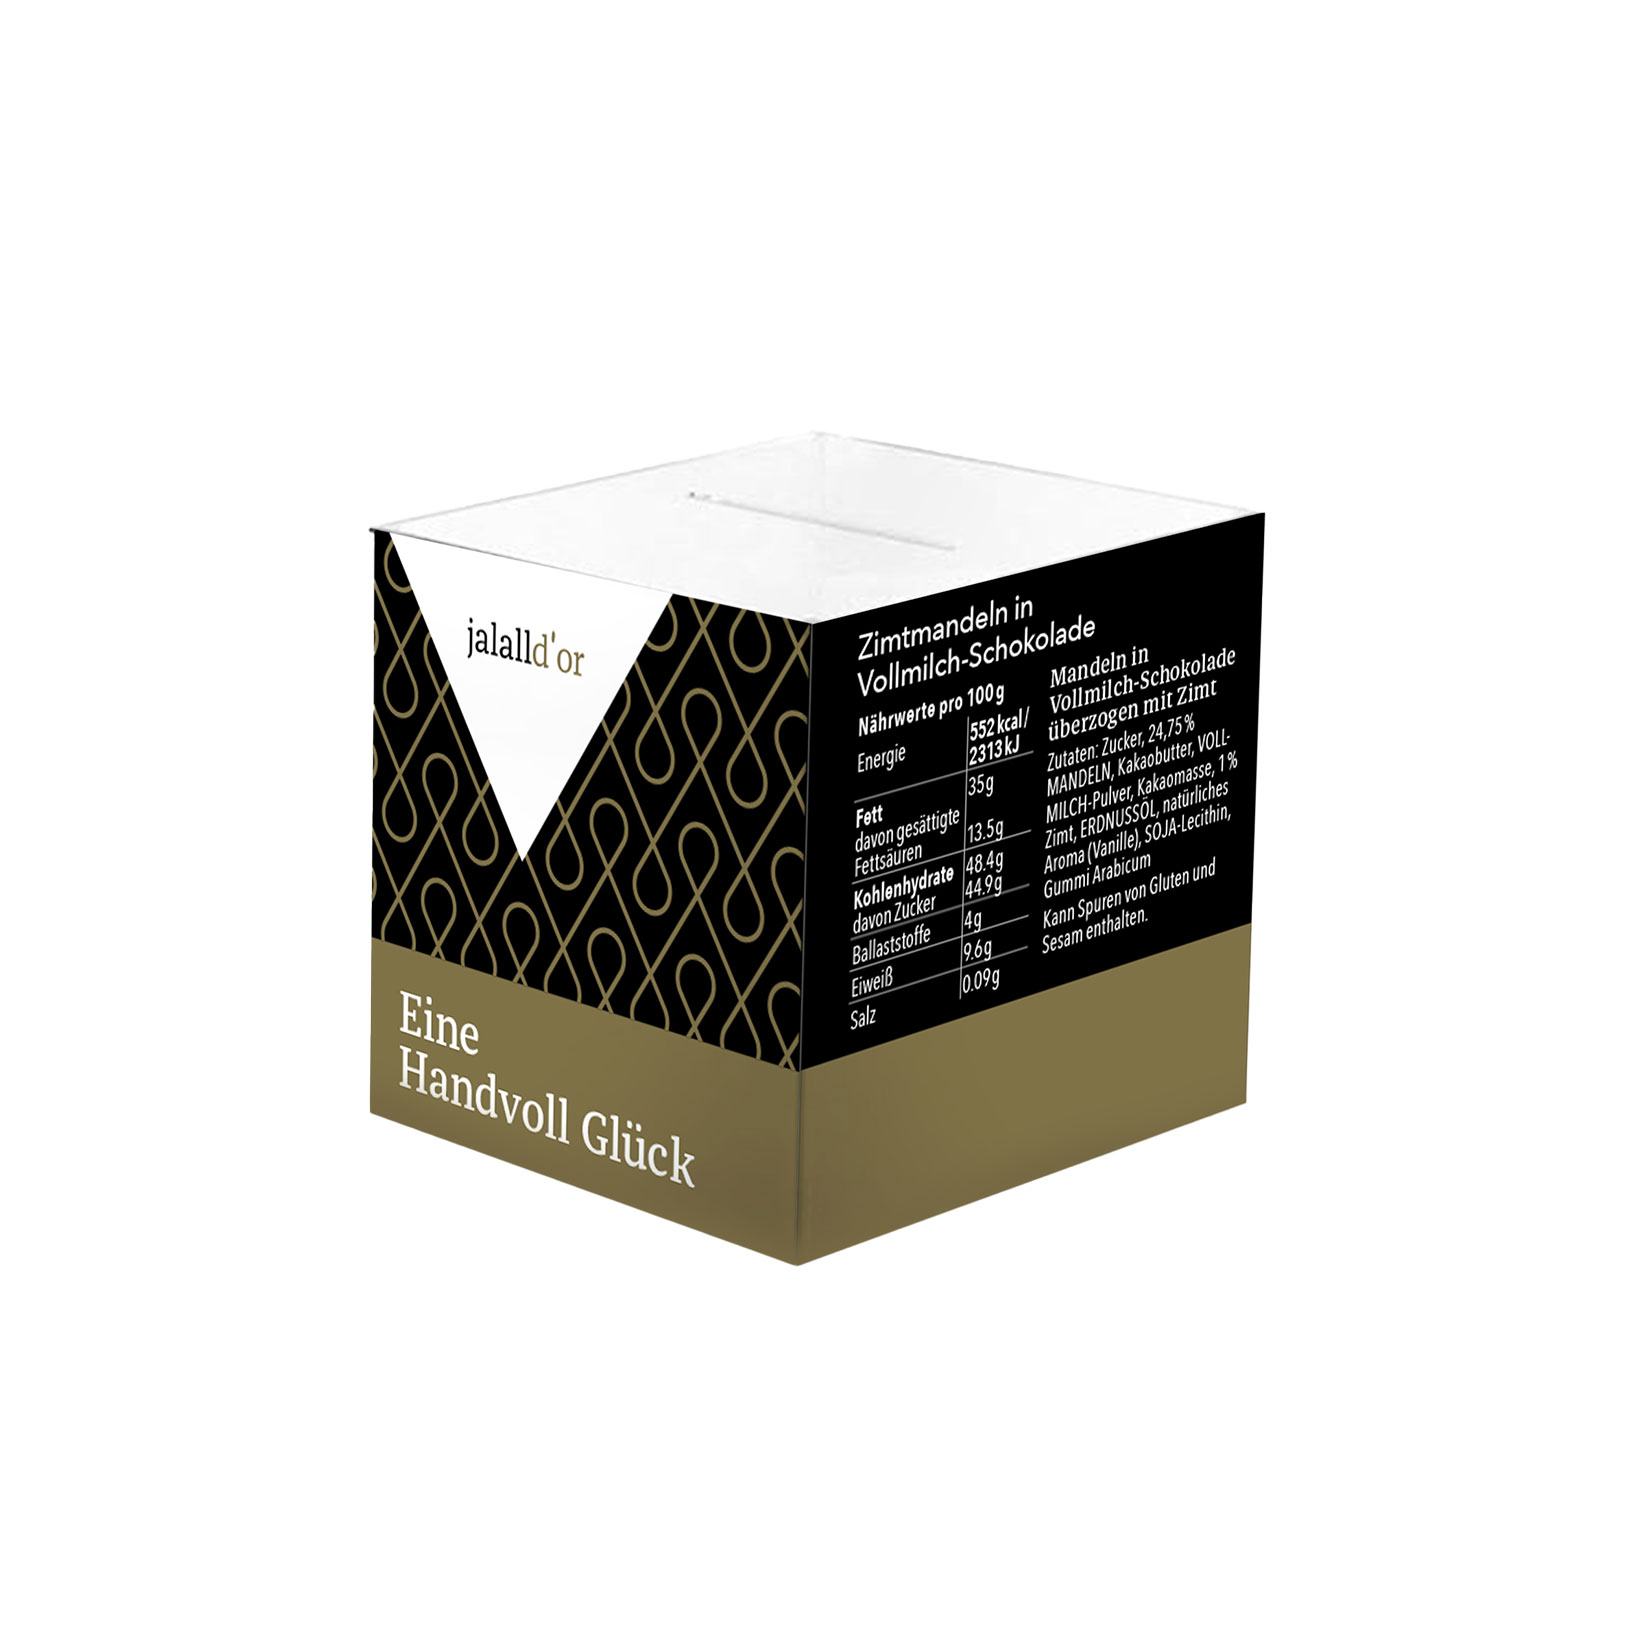 Jalall d'or Verpackungsdesign